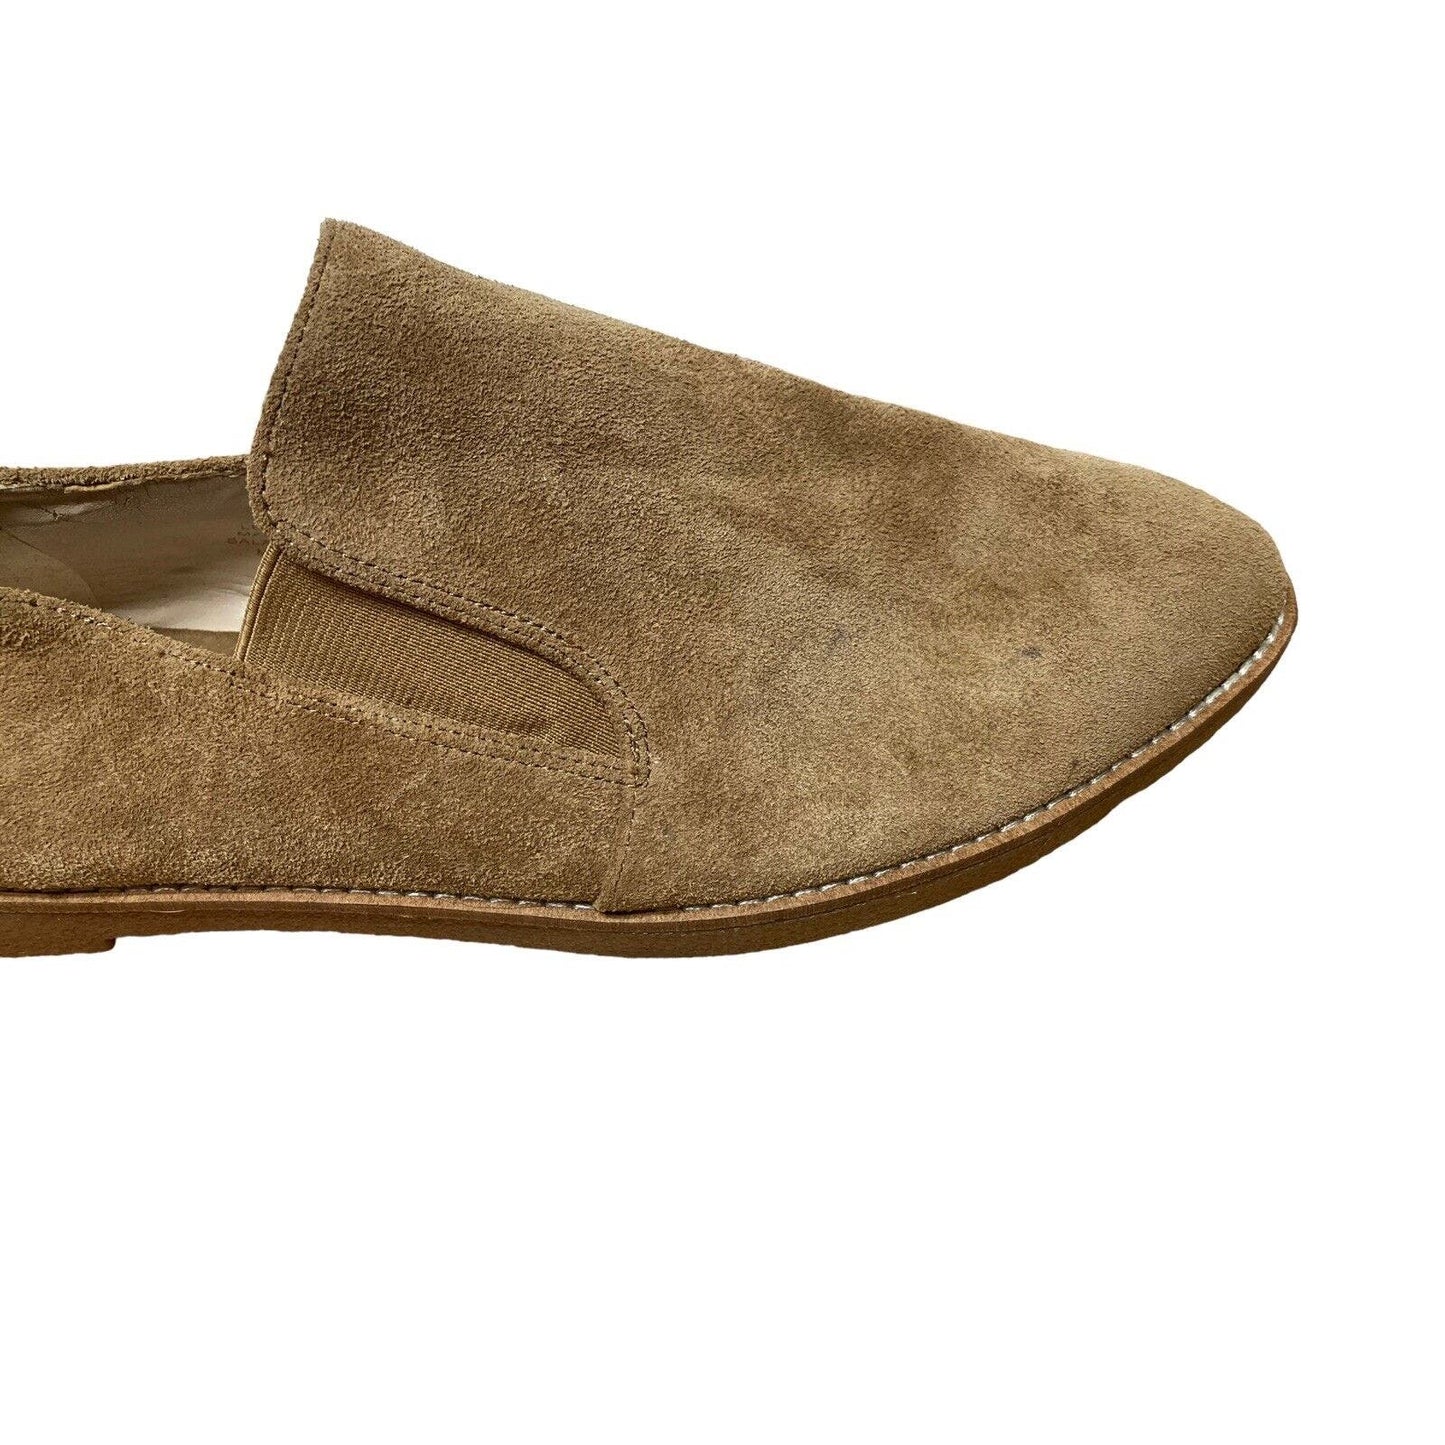 Nine West Quinko Suede Leather Slip On Loafer Women's US 9.5 M Tan Brown